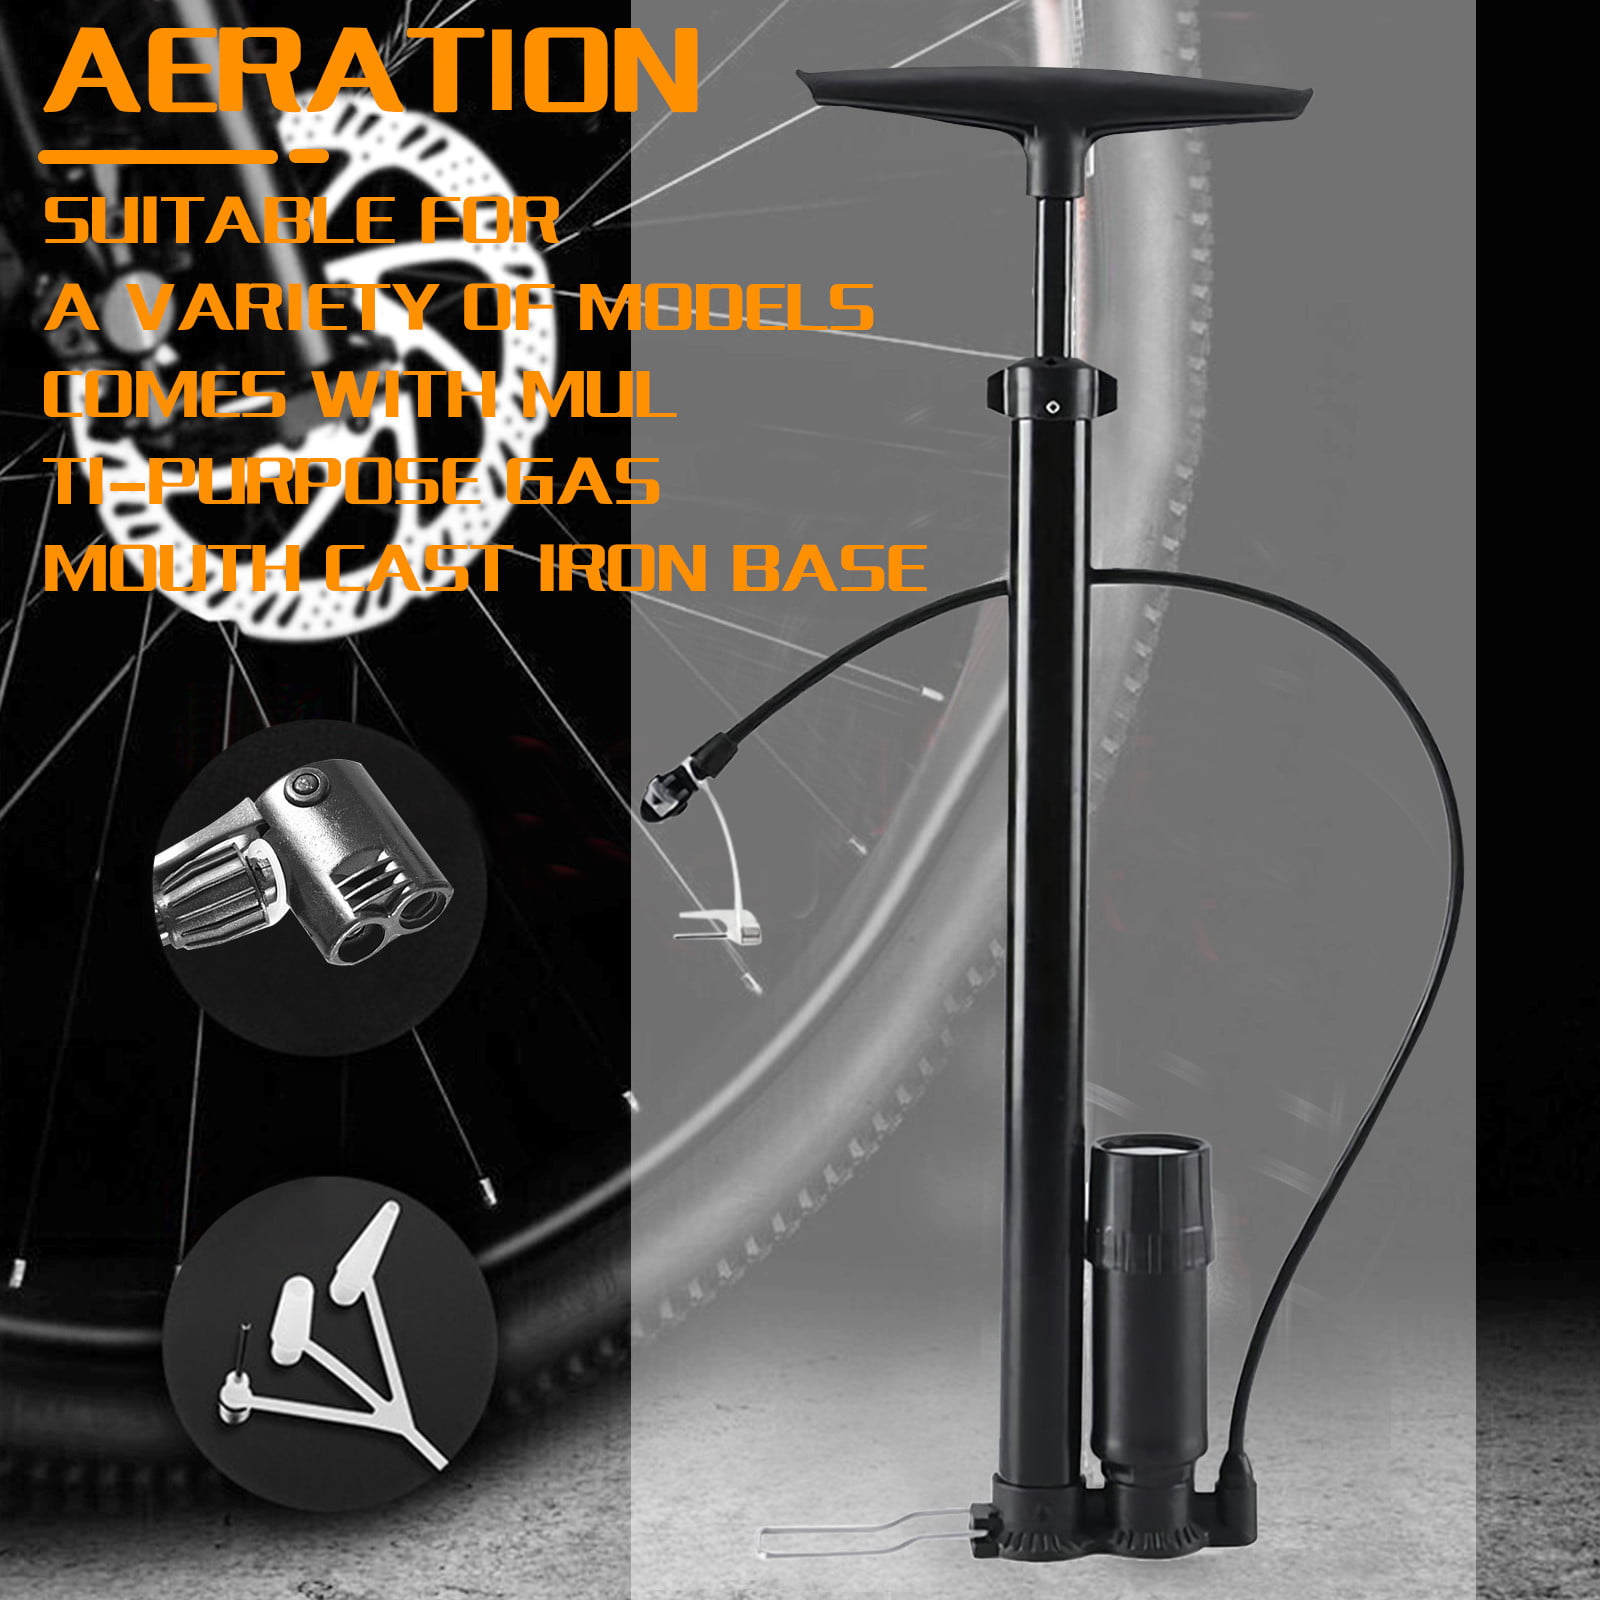 Details about  / Hand Air Pump Foot Bicycle Bike Tire 160PSI Basketball Football Soccer Ball Pool